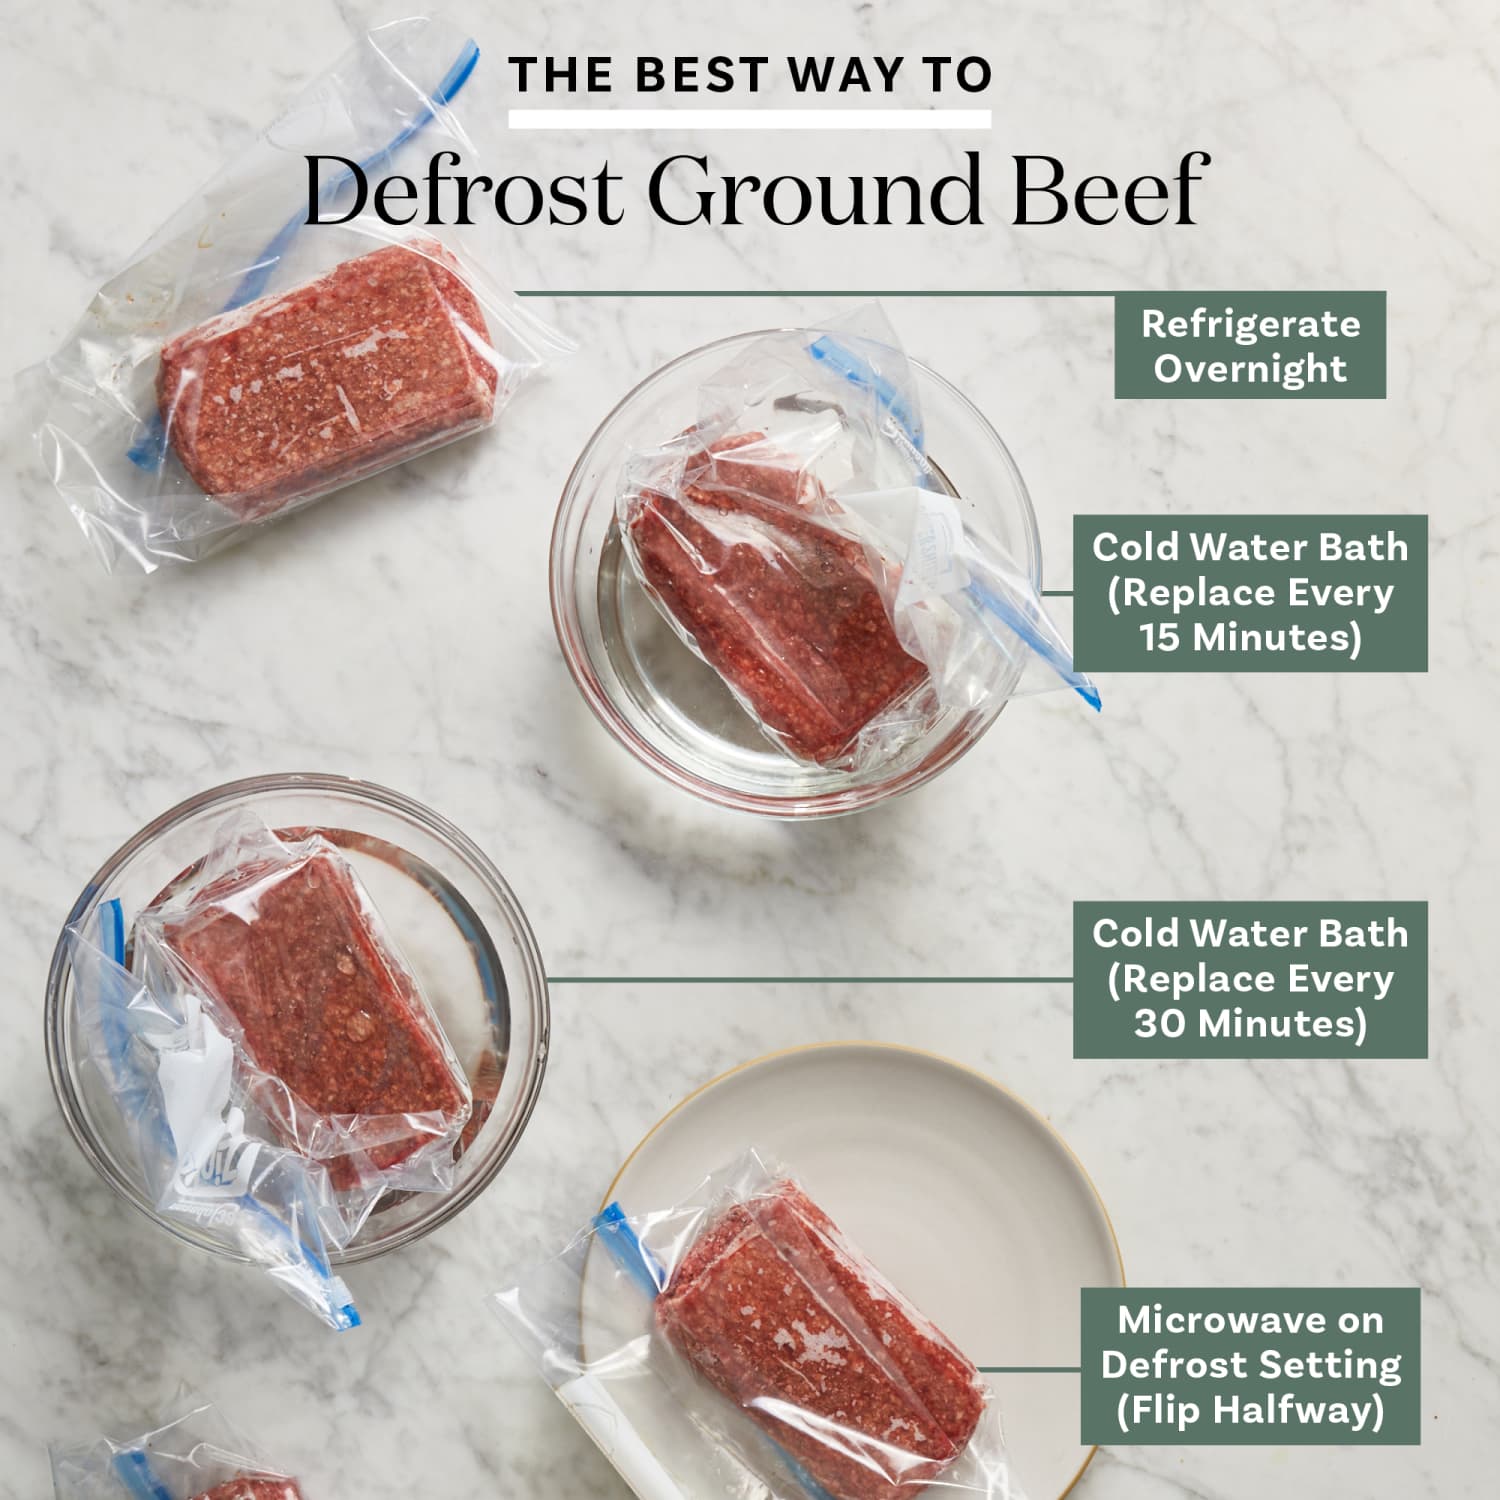 How to Properly Freeze Meat - GoodLand Kitchen